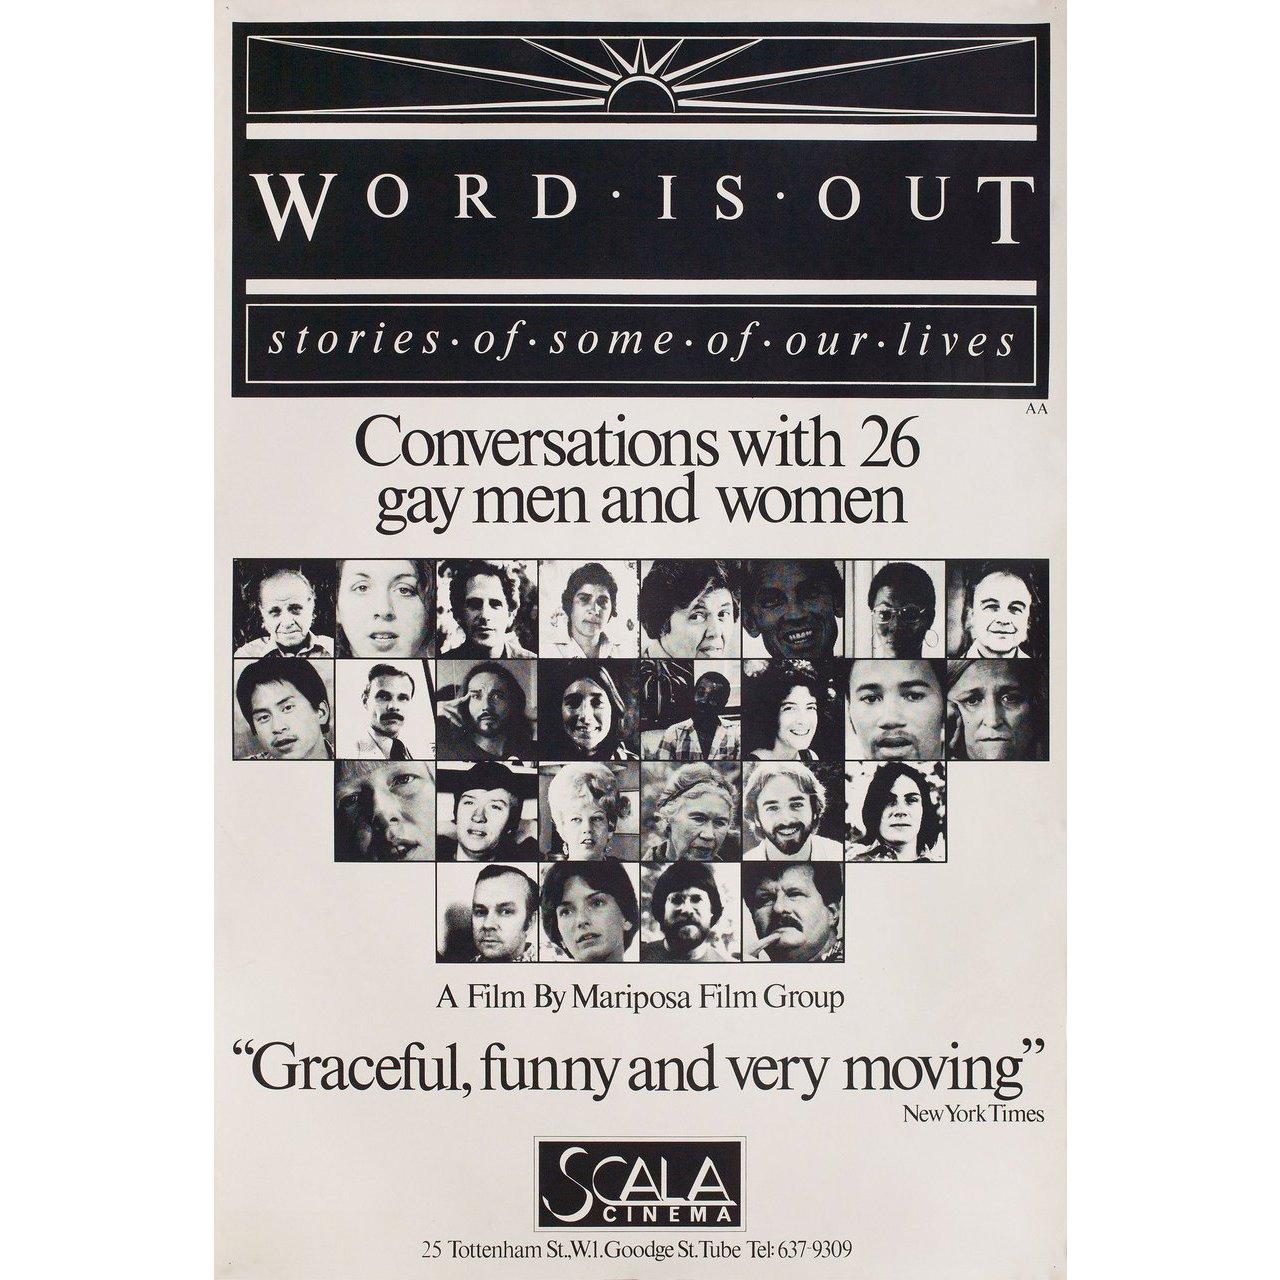 Original 1977 British double crown poster for the documentary film Word Is Out directed by Nancy Adair / Andrew Brown / Rob Epstein with Pat Bond / John Burnside / Sally M. Gearhart / Elsa Gidlow. Very good-fine condition, rolled. Please note: the